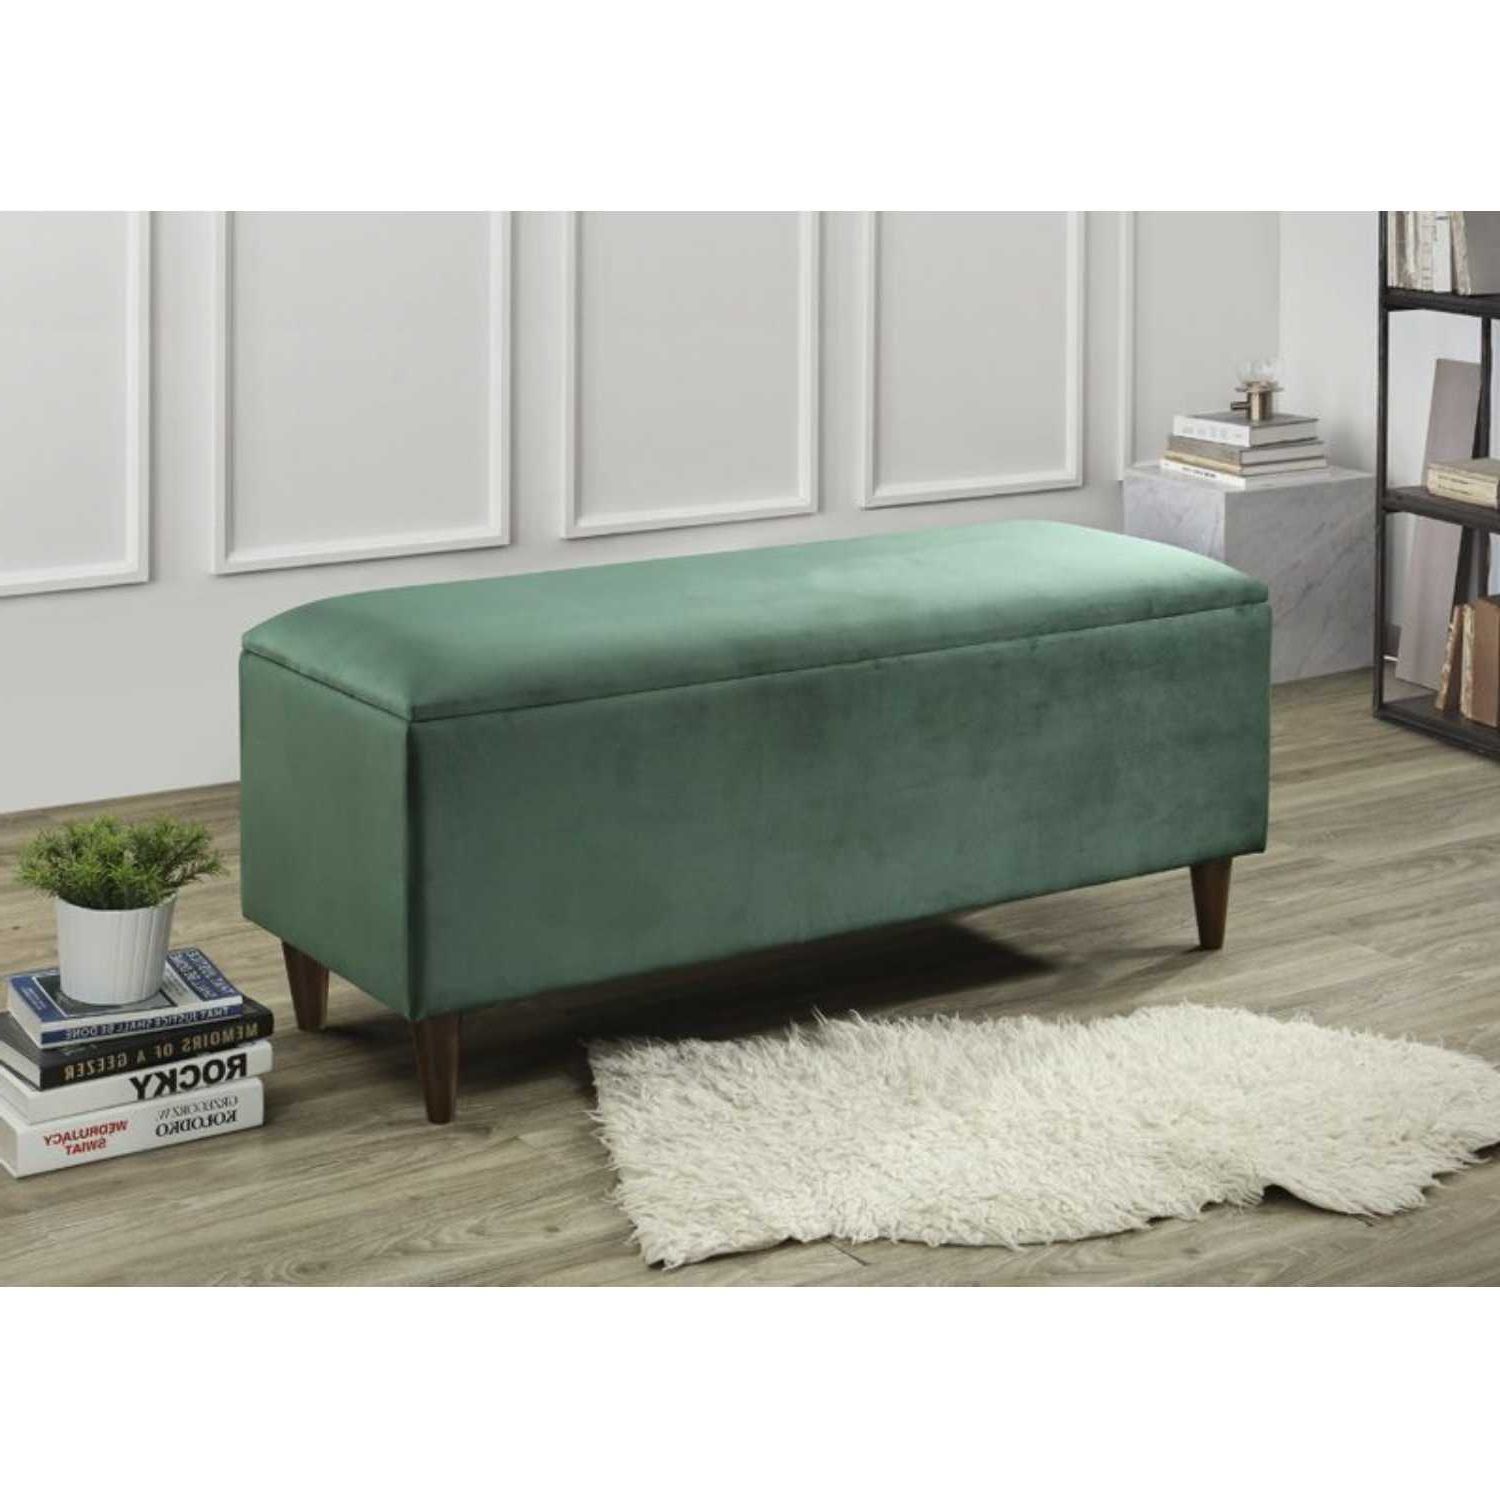 Most Popular Navy Velvet Fabric Benches Pertaining To Emma Storage Ottoman Bench In Green Velvet Fabric With Dark Wood Legs (View 5 of 10)